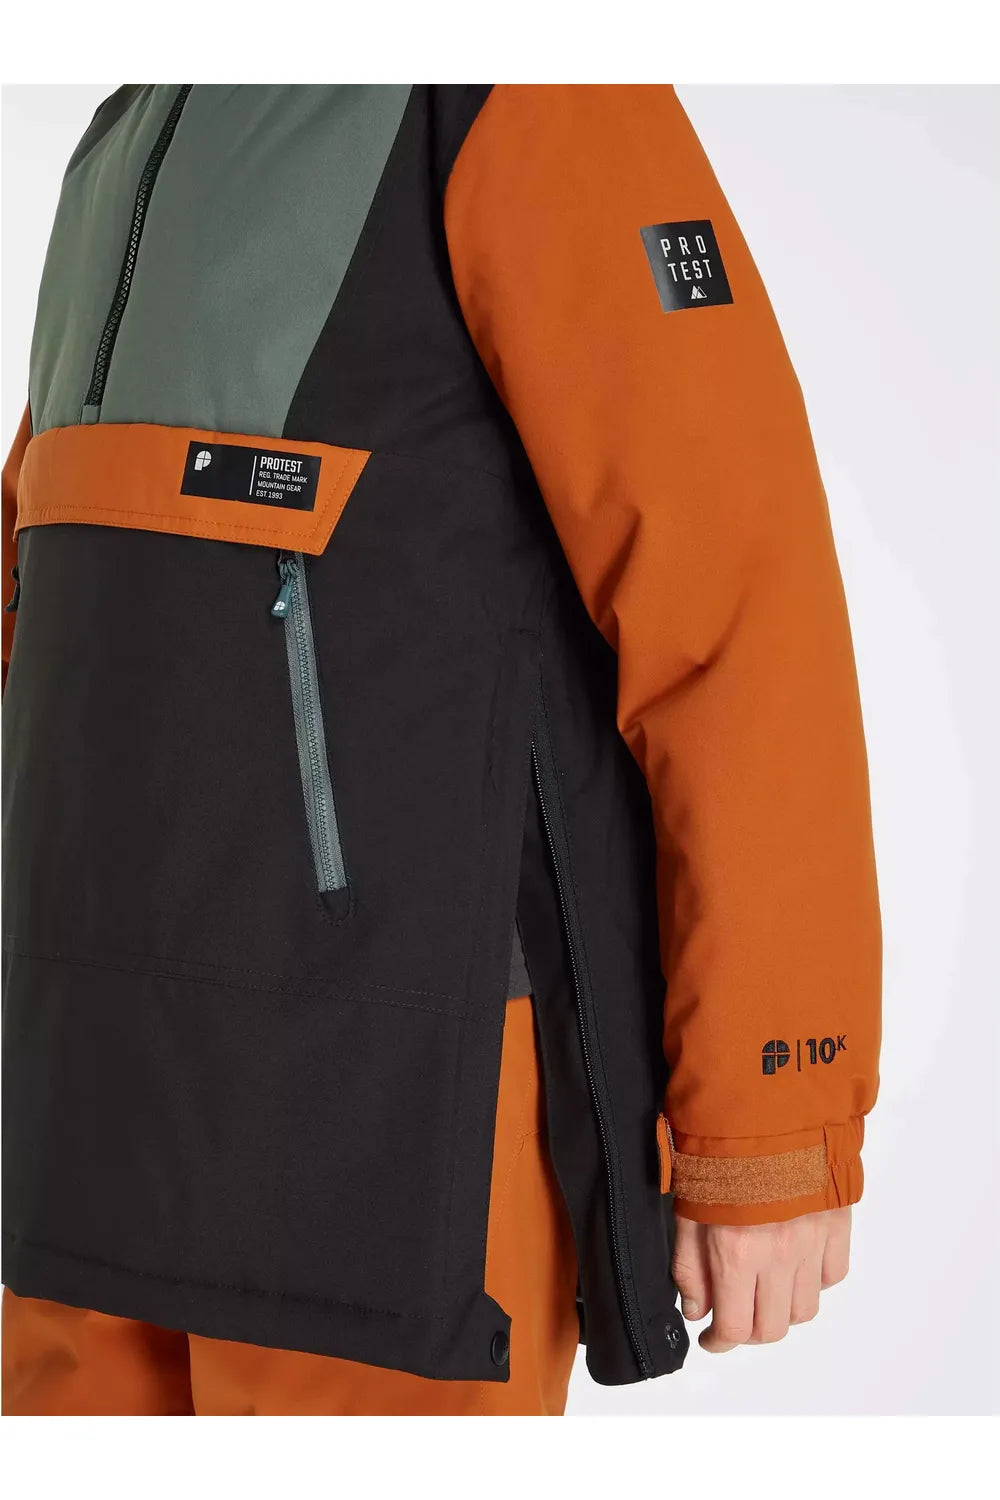 Protest Isaact Jr Anorak